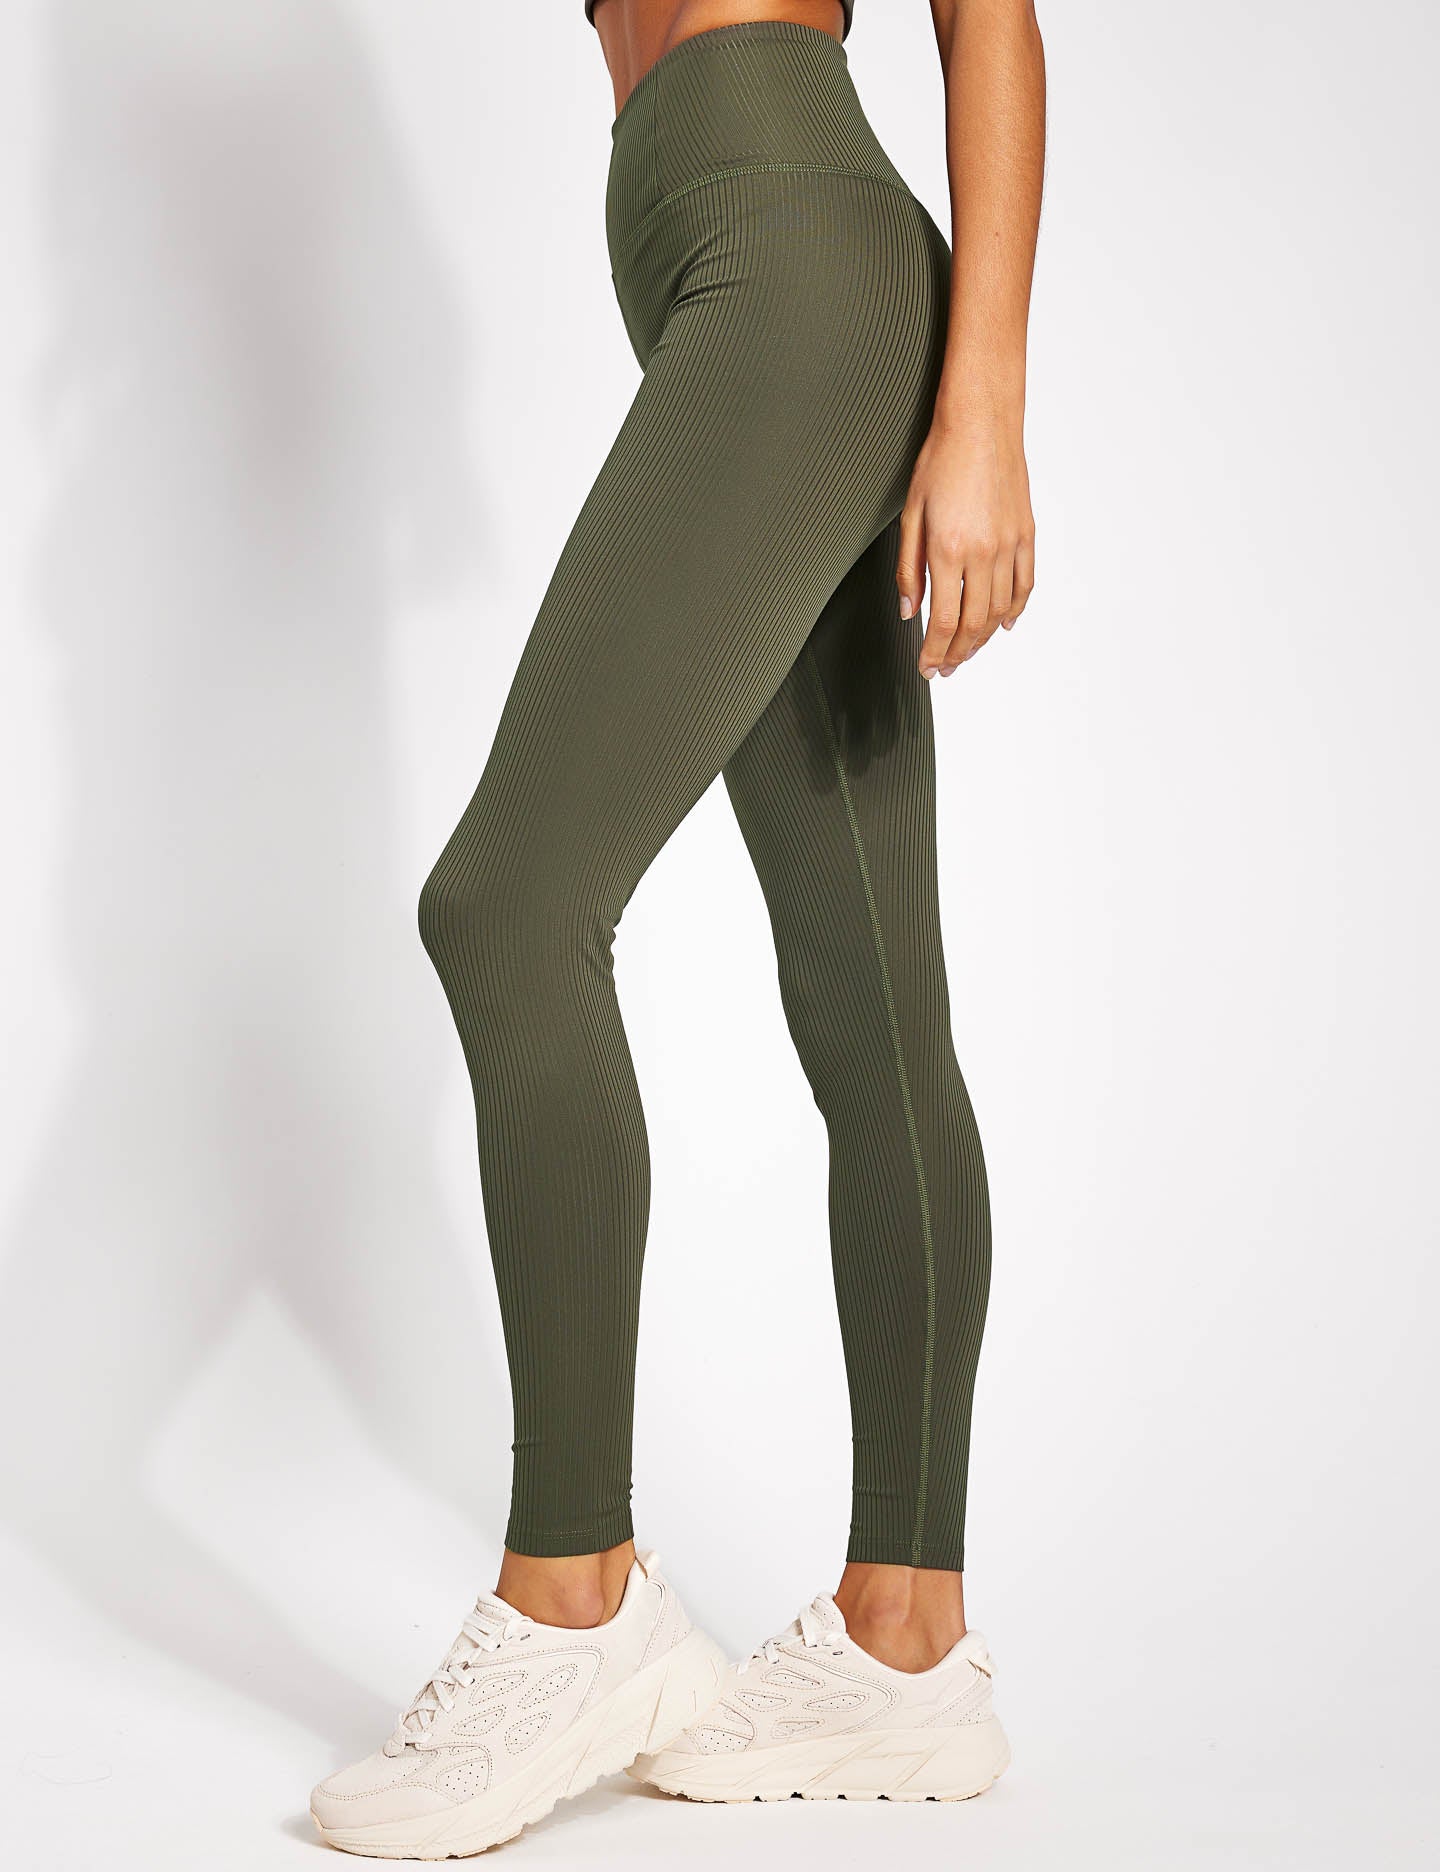 Girlfriend Collective RIB High Waisted Legging - Cypressimages1- The Sports Edit